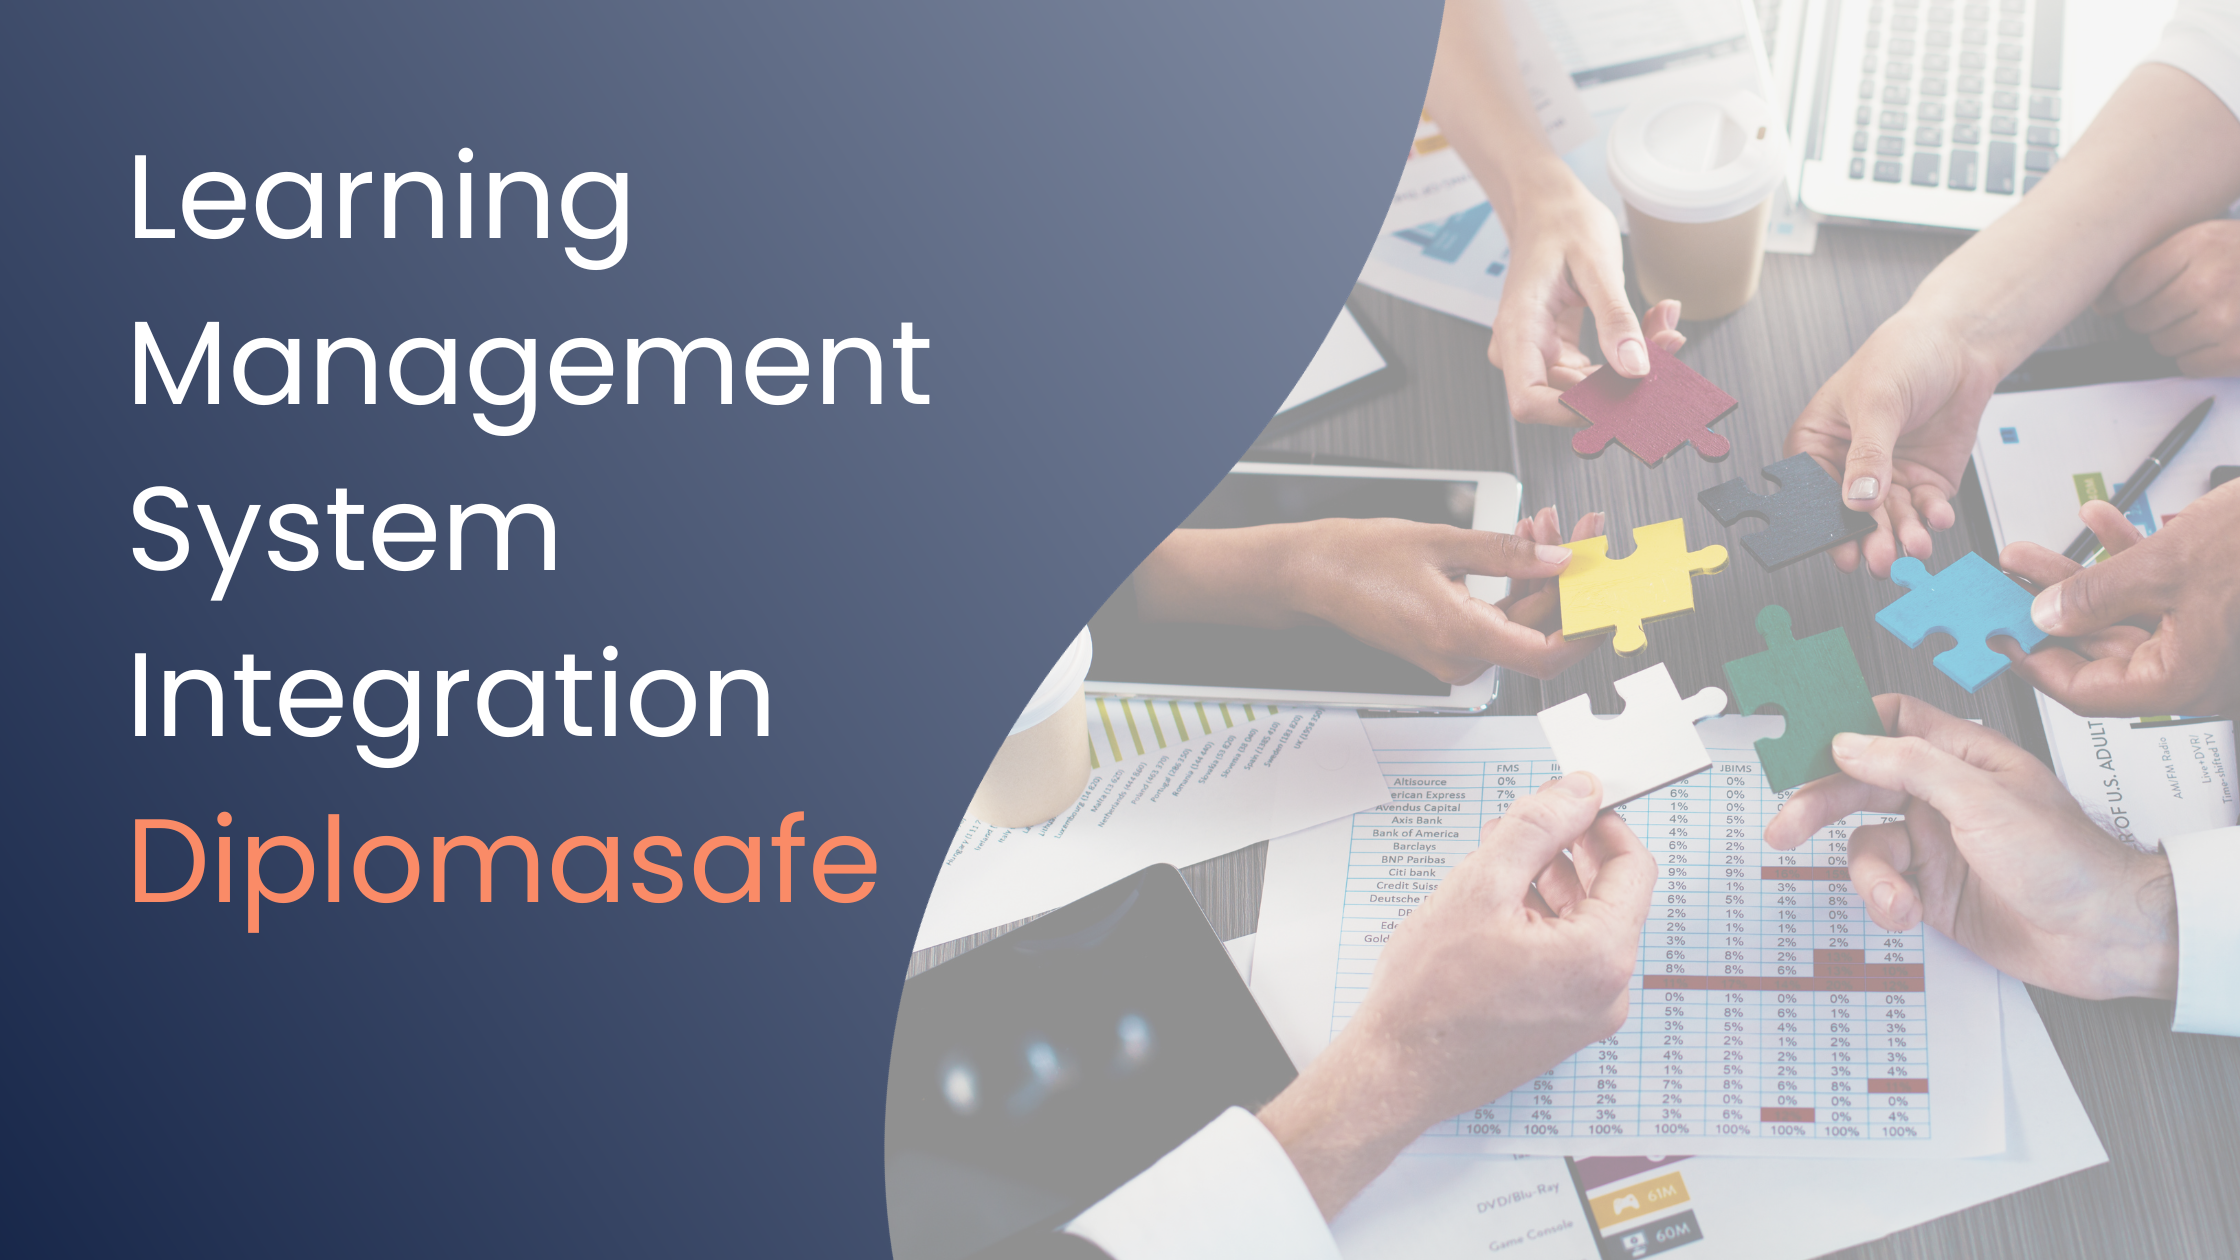 Learning Management System Integration With Diplomasafe